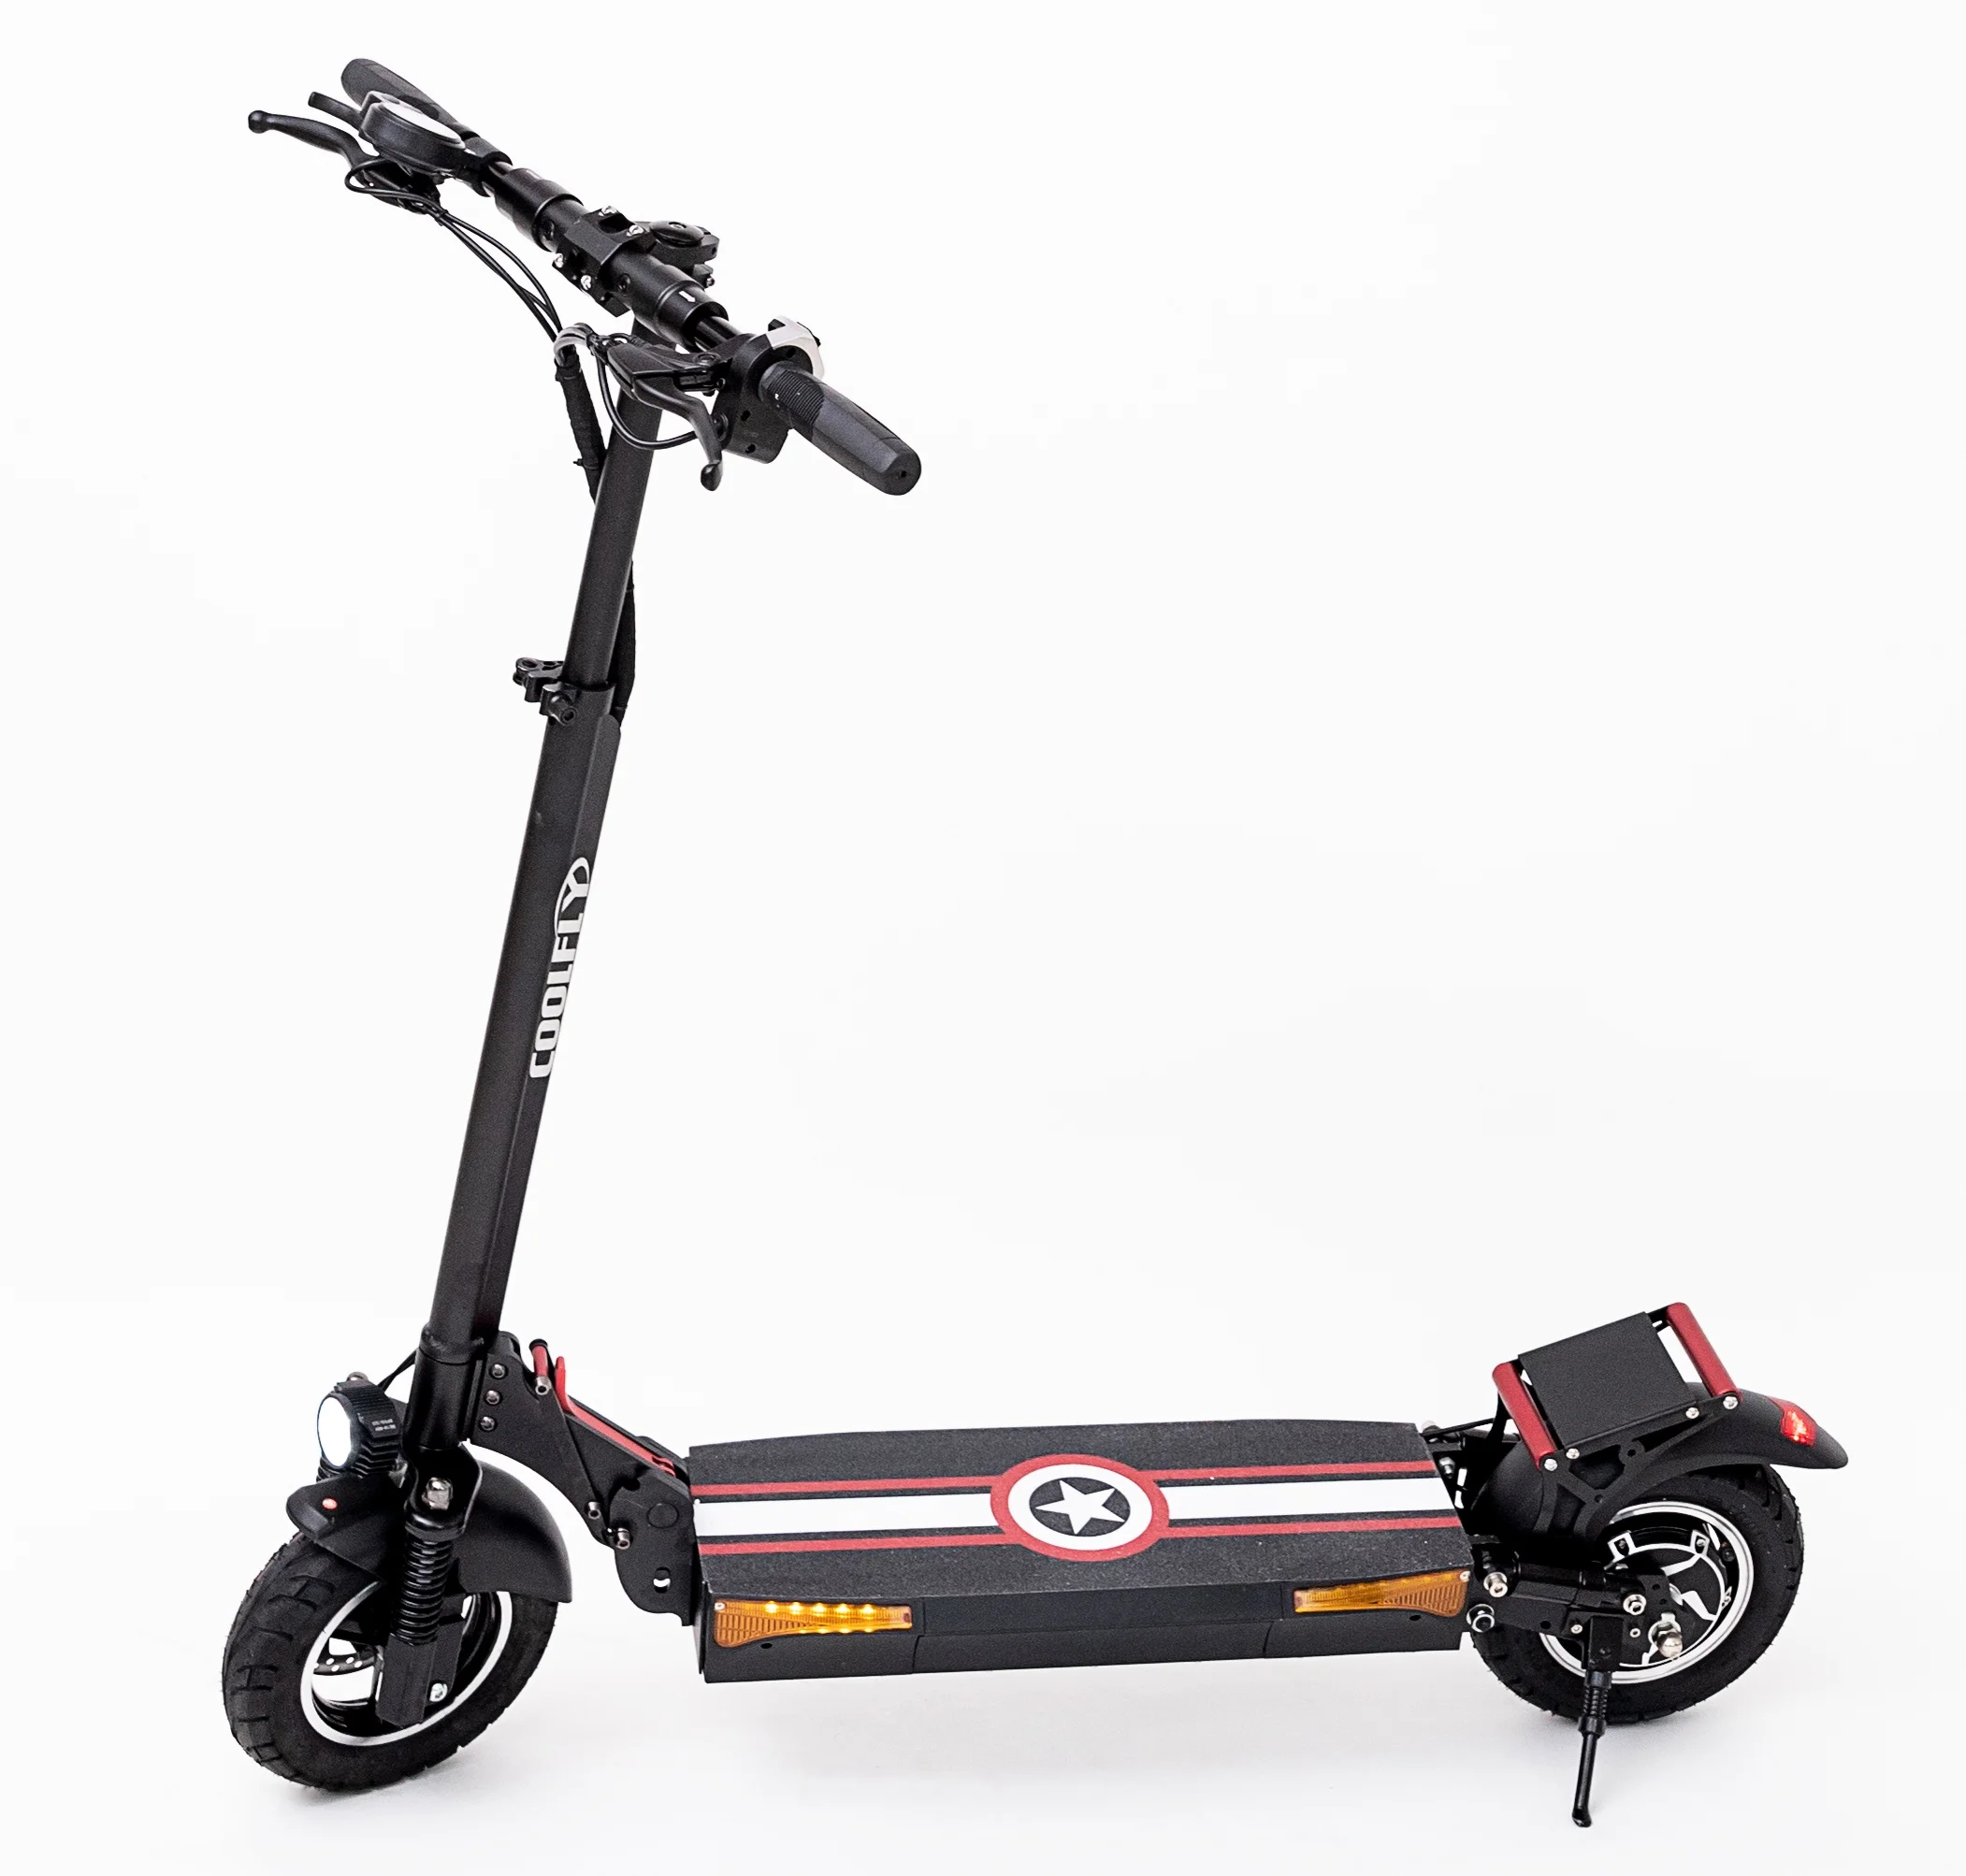 

Off road best wholesale 250w 500w 800w 1000w 48v 15Ah new electric scooter europe warehouse kick e scooter sport with CE, Black